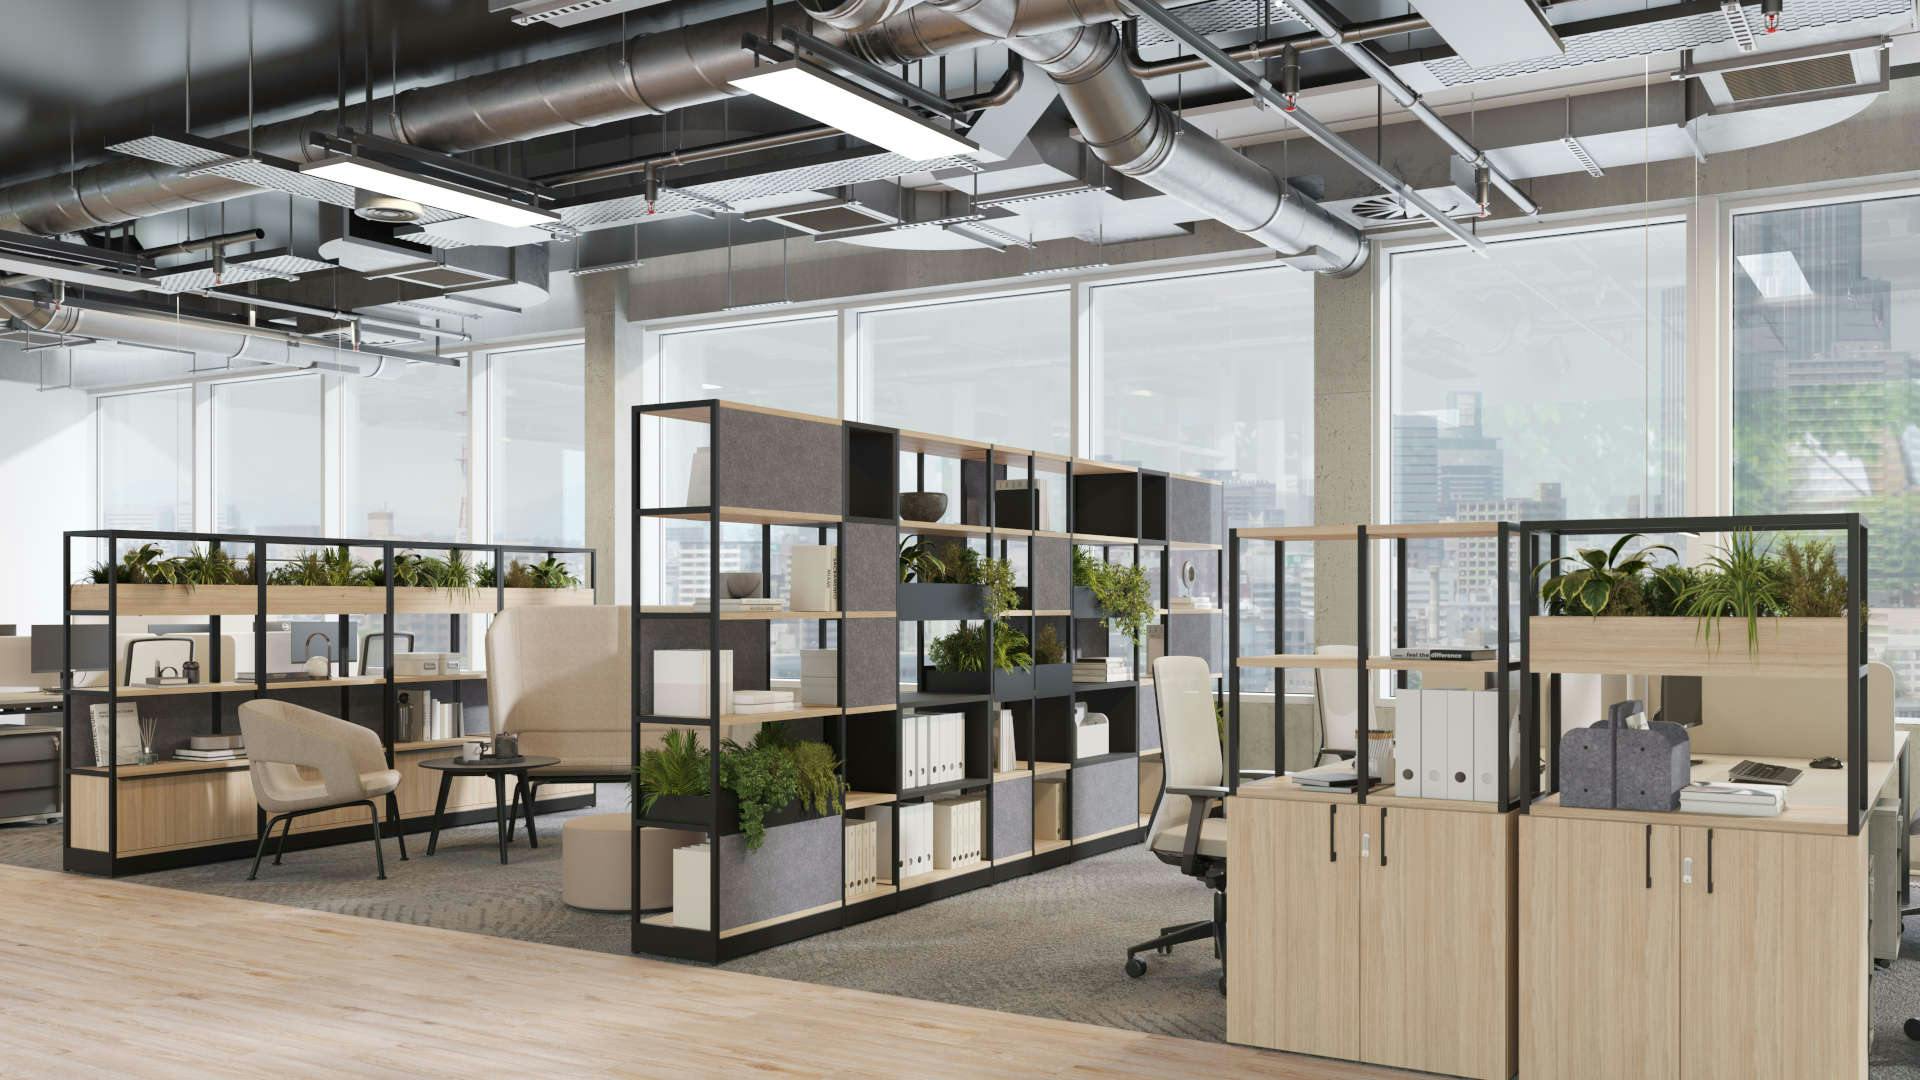 A new generation of work spaces